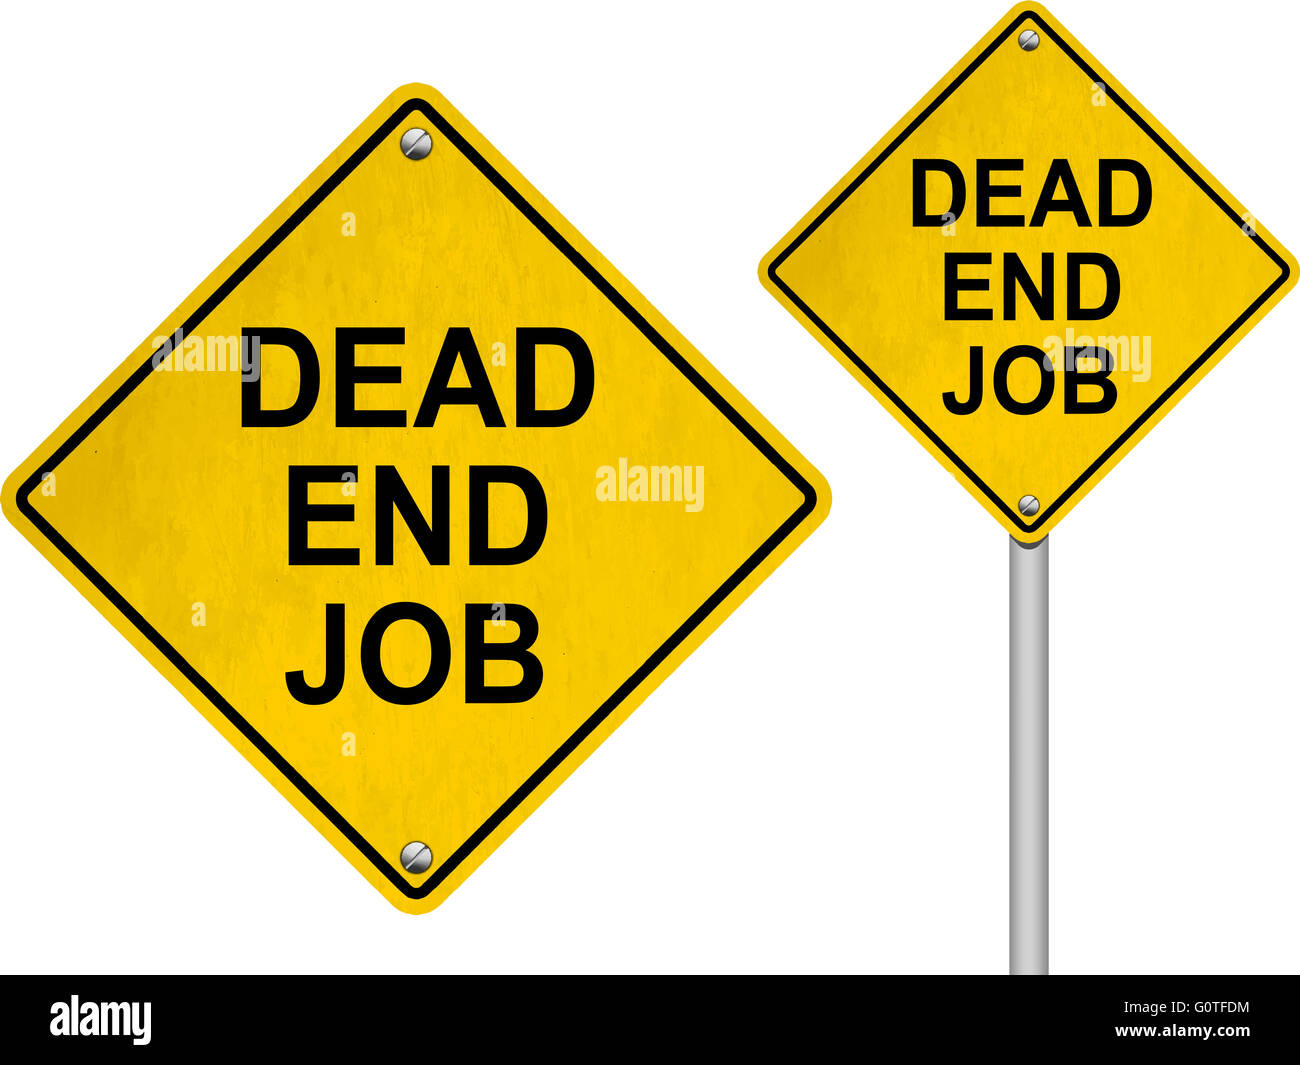 Dead End Job Road Signs Stock Photo